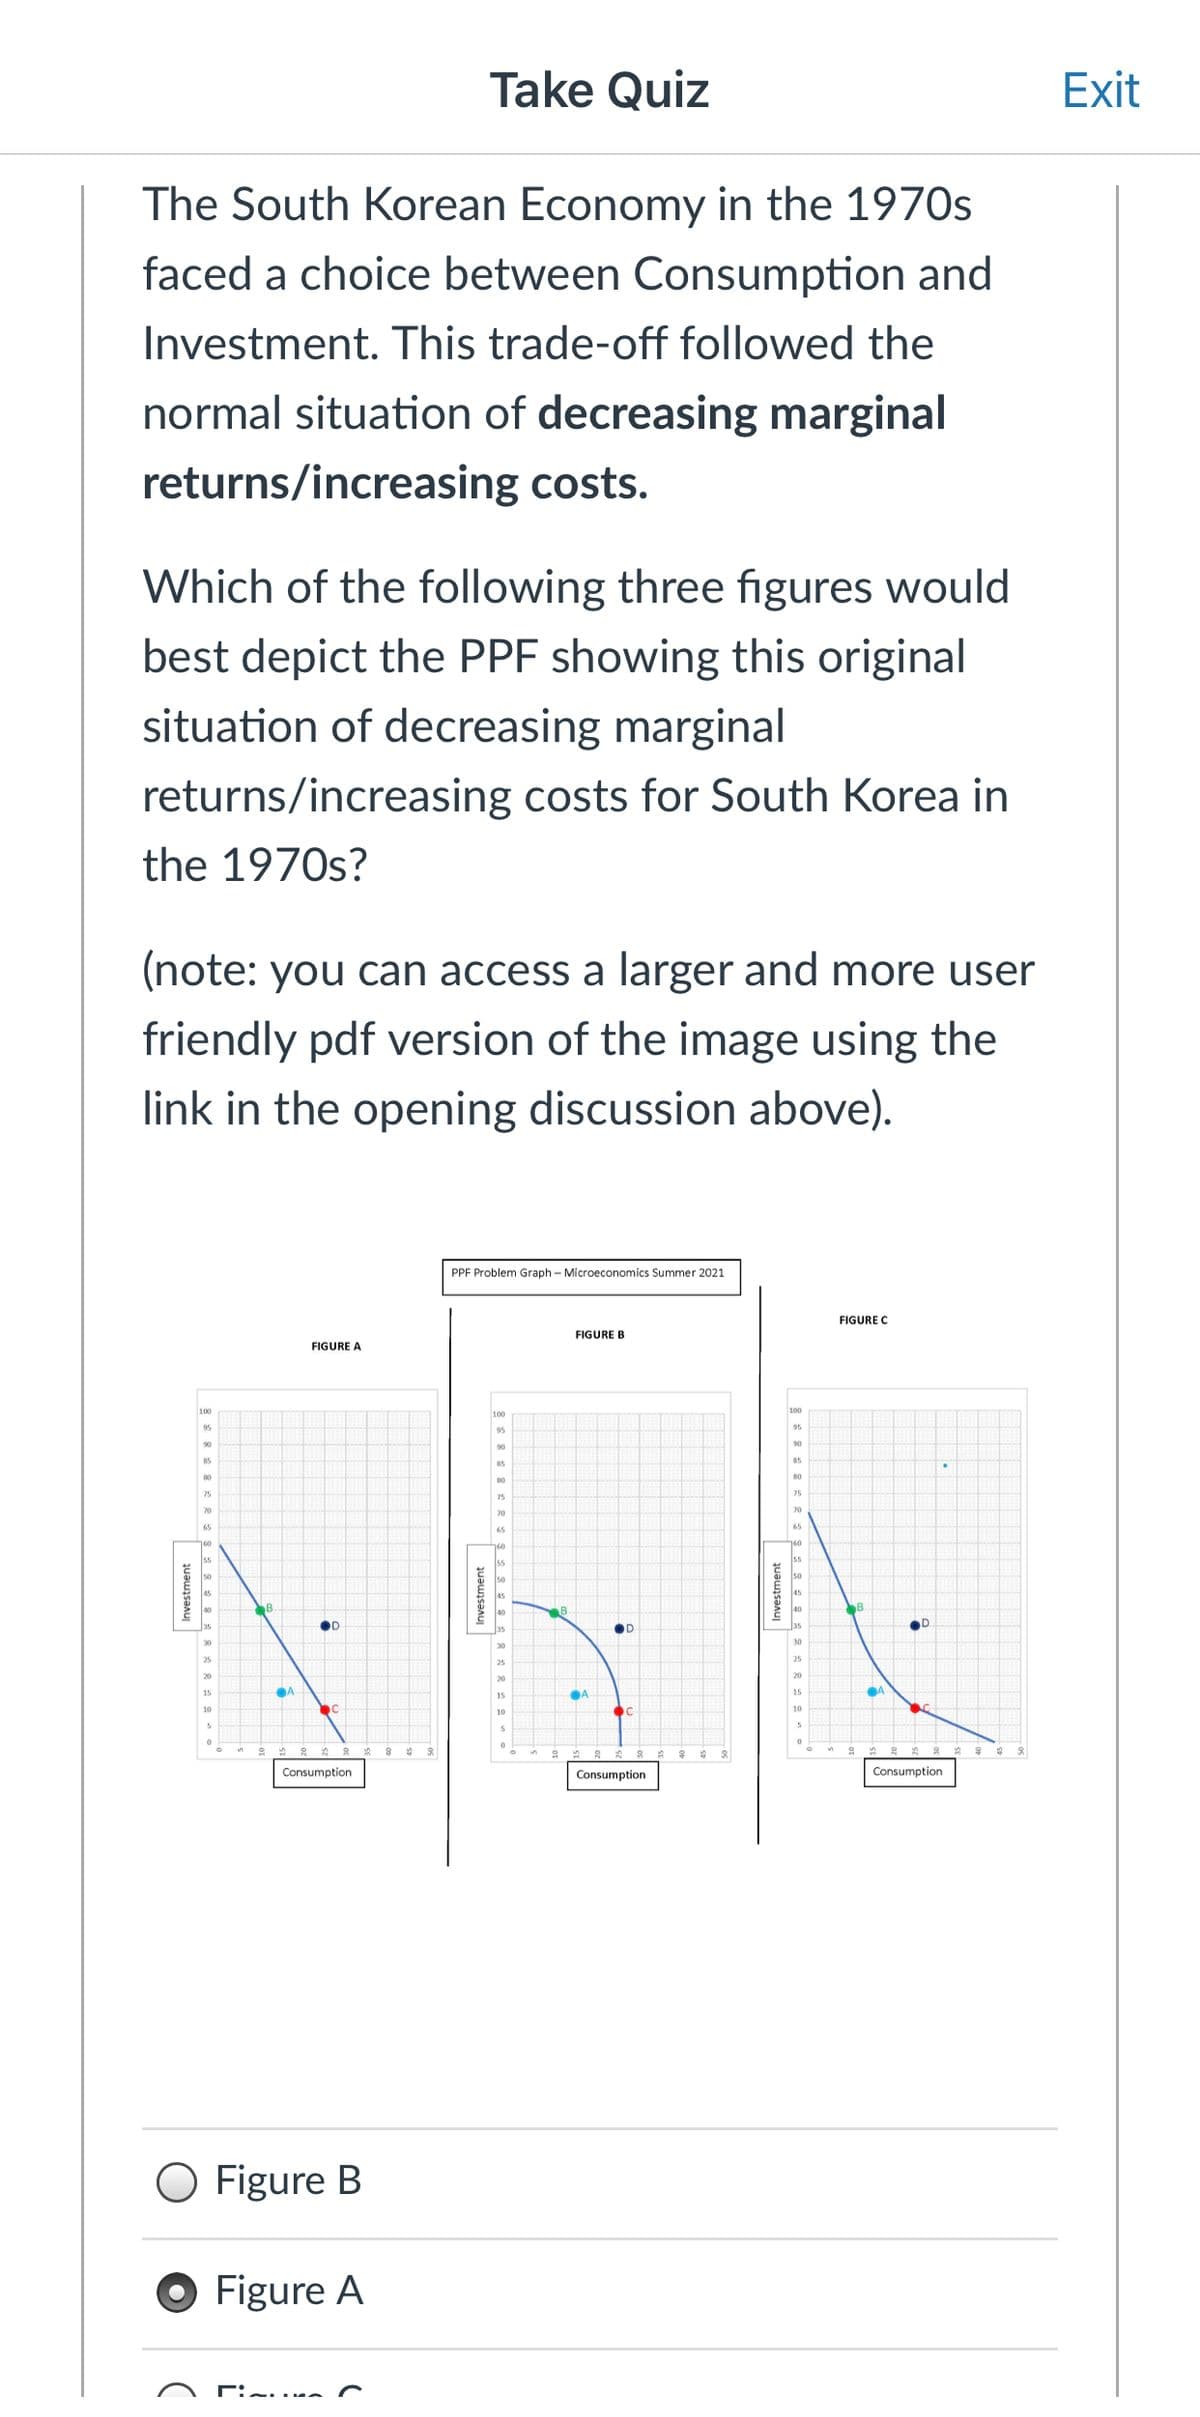 Take Quiz
Exit
The South Korean Economy in the 1970s
faced a choice between Consumption and
Investment. This trade-off followed the
normal situation of decreasing marginal
returns/increasing costs.
Which of the following three figures would
best depict the PPF showing this original
situation of decreasing marginal
returns/increasing costs for South Korea in
the 1970s?
(note: you can access a larger and more user
friendly pdf version of the image using the
link in the opening discussion above).
PPF Problem Graph – Microeconomics Summer 2021
FIGURE C
FIGURE B
FIGURE A
100
100
95
95
90
90
90
85
85
80
80
75
75
75
70
OD
25
20
20
15
A
15
15
10
10
5.
Consumption
Consumption
Consumption
O Figure B
Figure A
Investment
Investment
Investment
